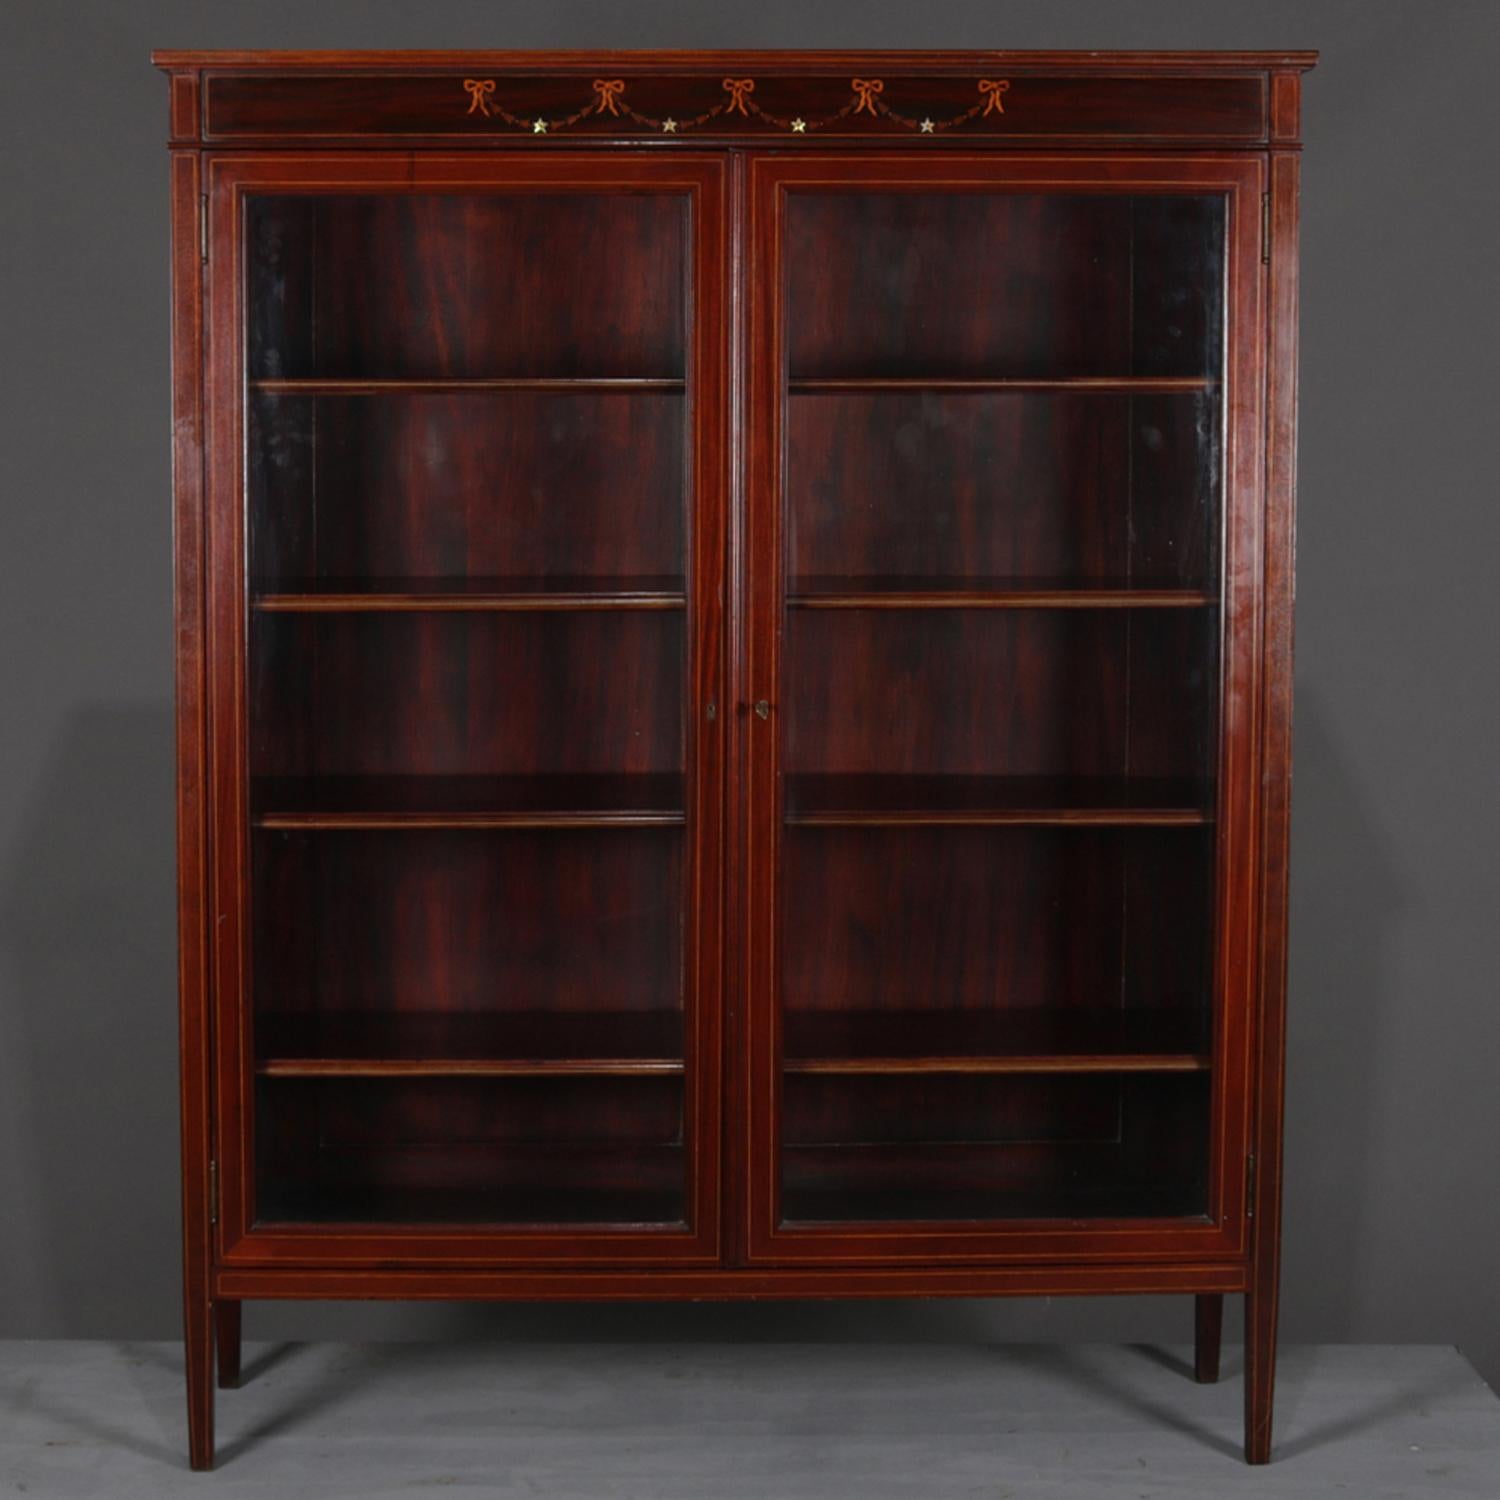 20th Century Antique Federal Style Mahogany and Satinwood Inlaid Two-Door Enclosed Bookcase